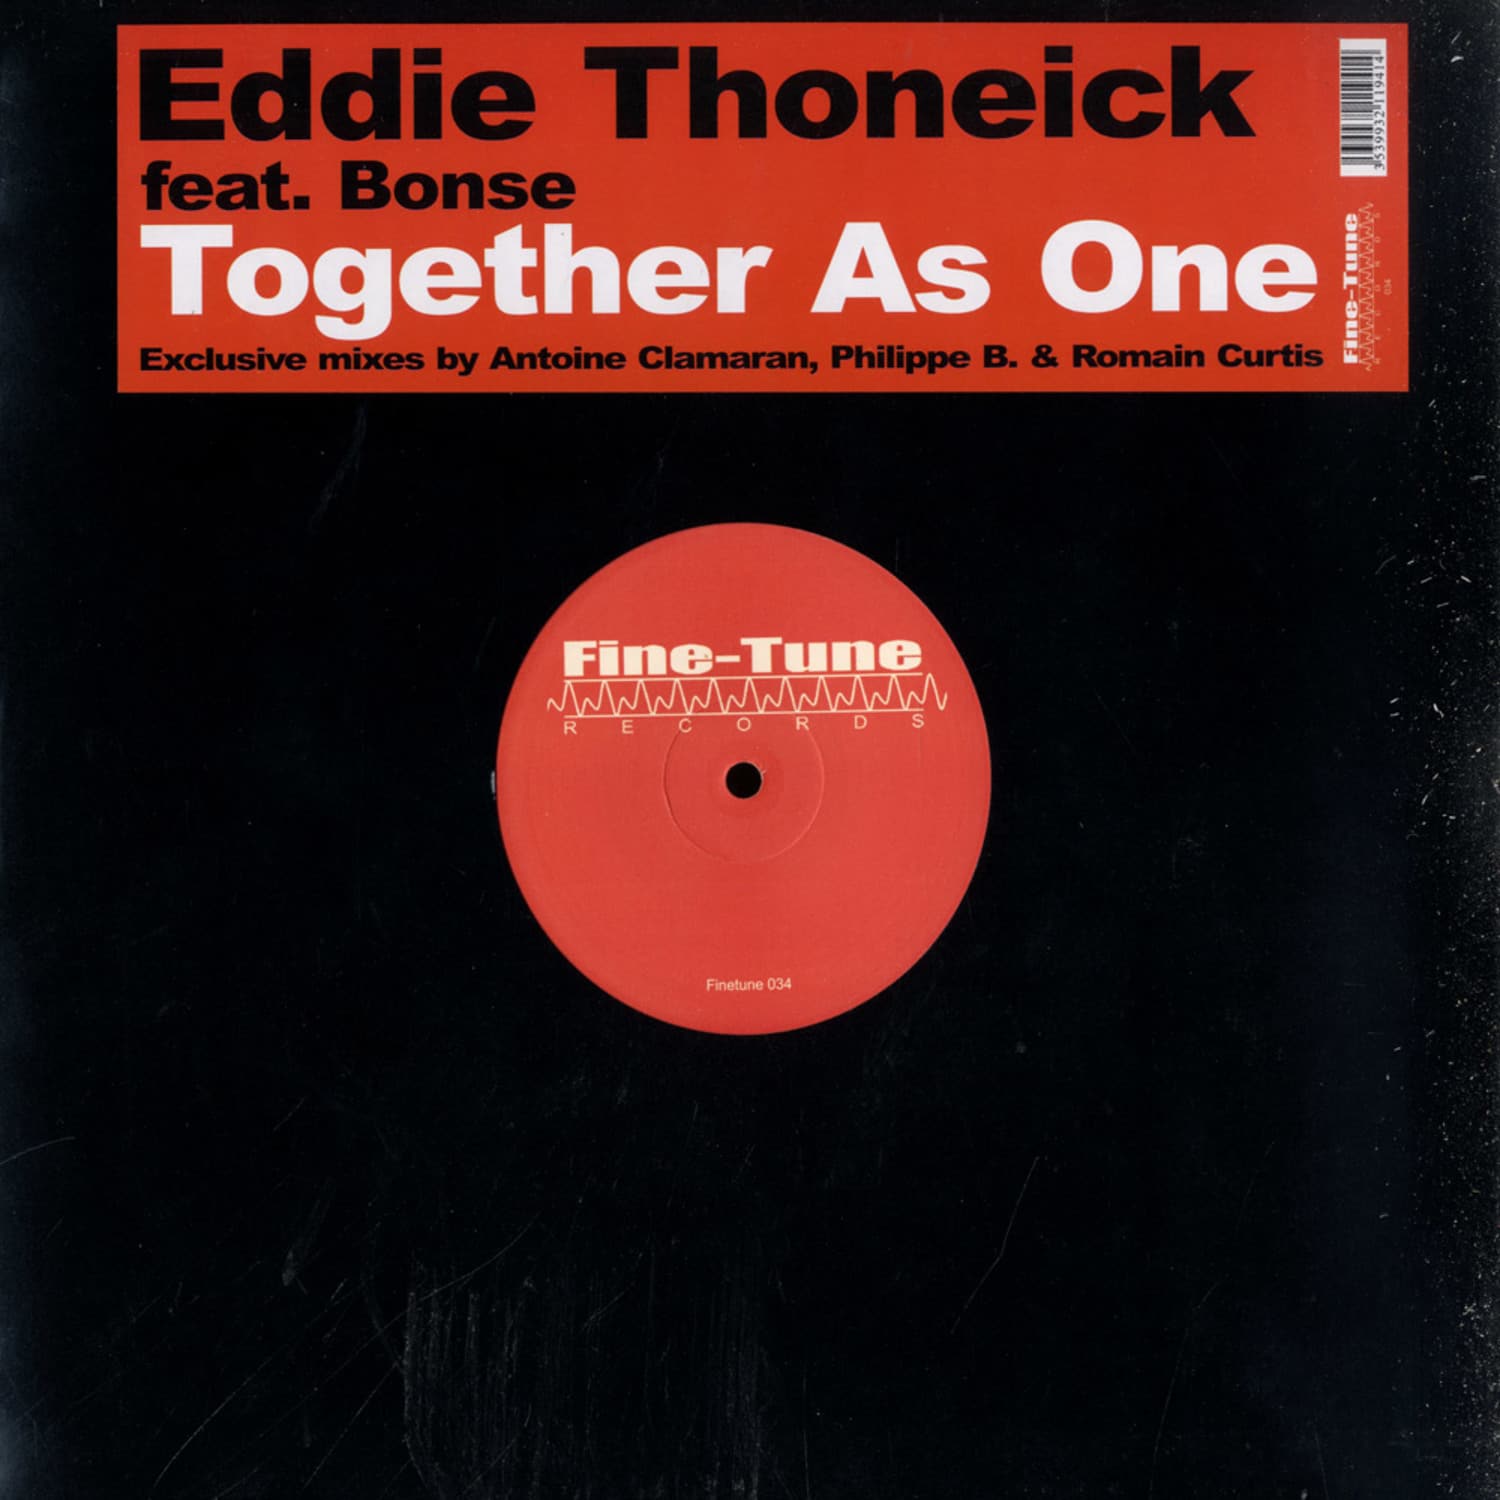 Eddie Thoneick Feat. Bonse - TOGETHER AS ONE